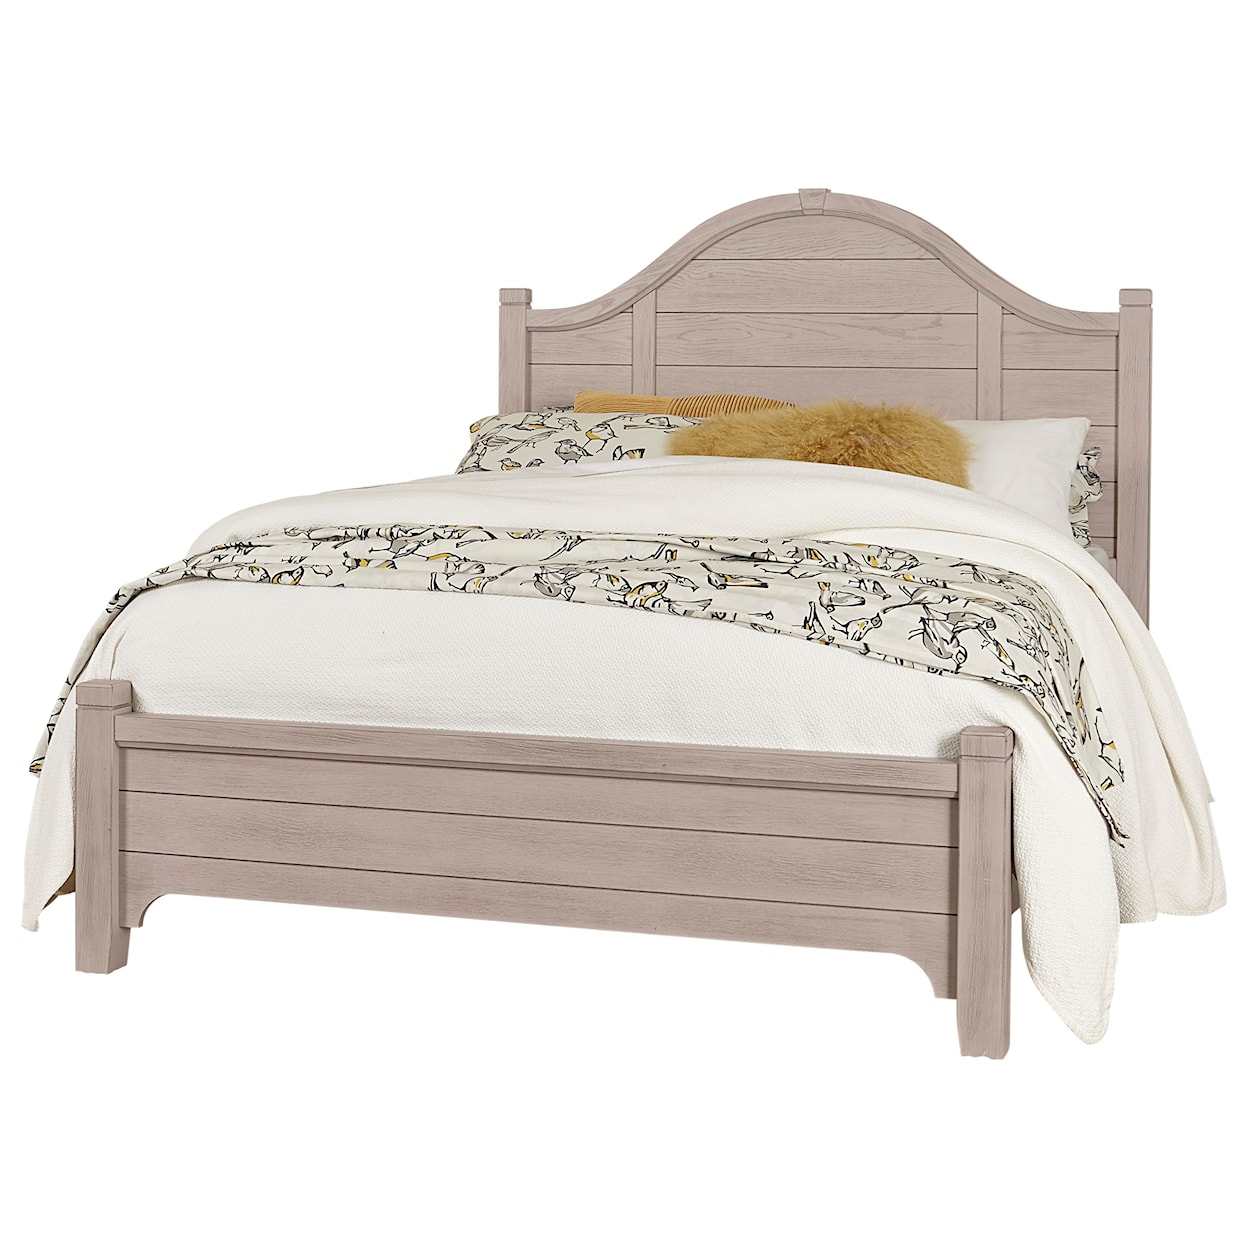 Laurel Mercantile Co Bungalow 741 558a 855a 922 Transitional Queen Low Profile Bed With Arch